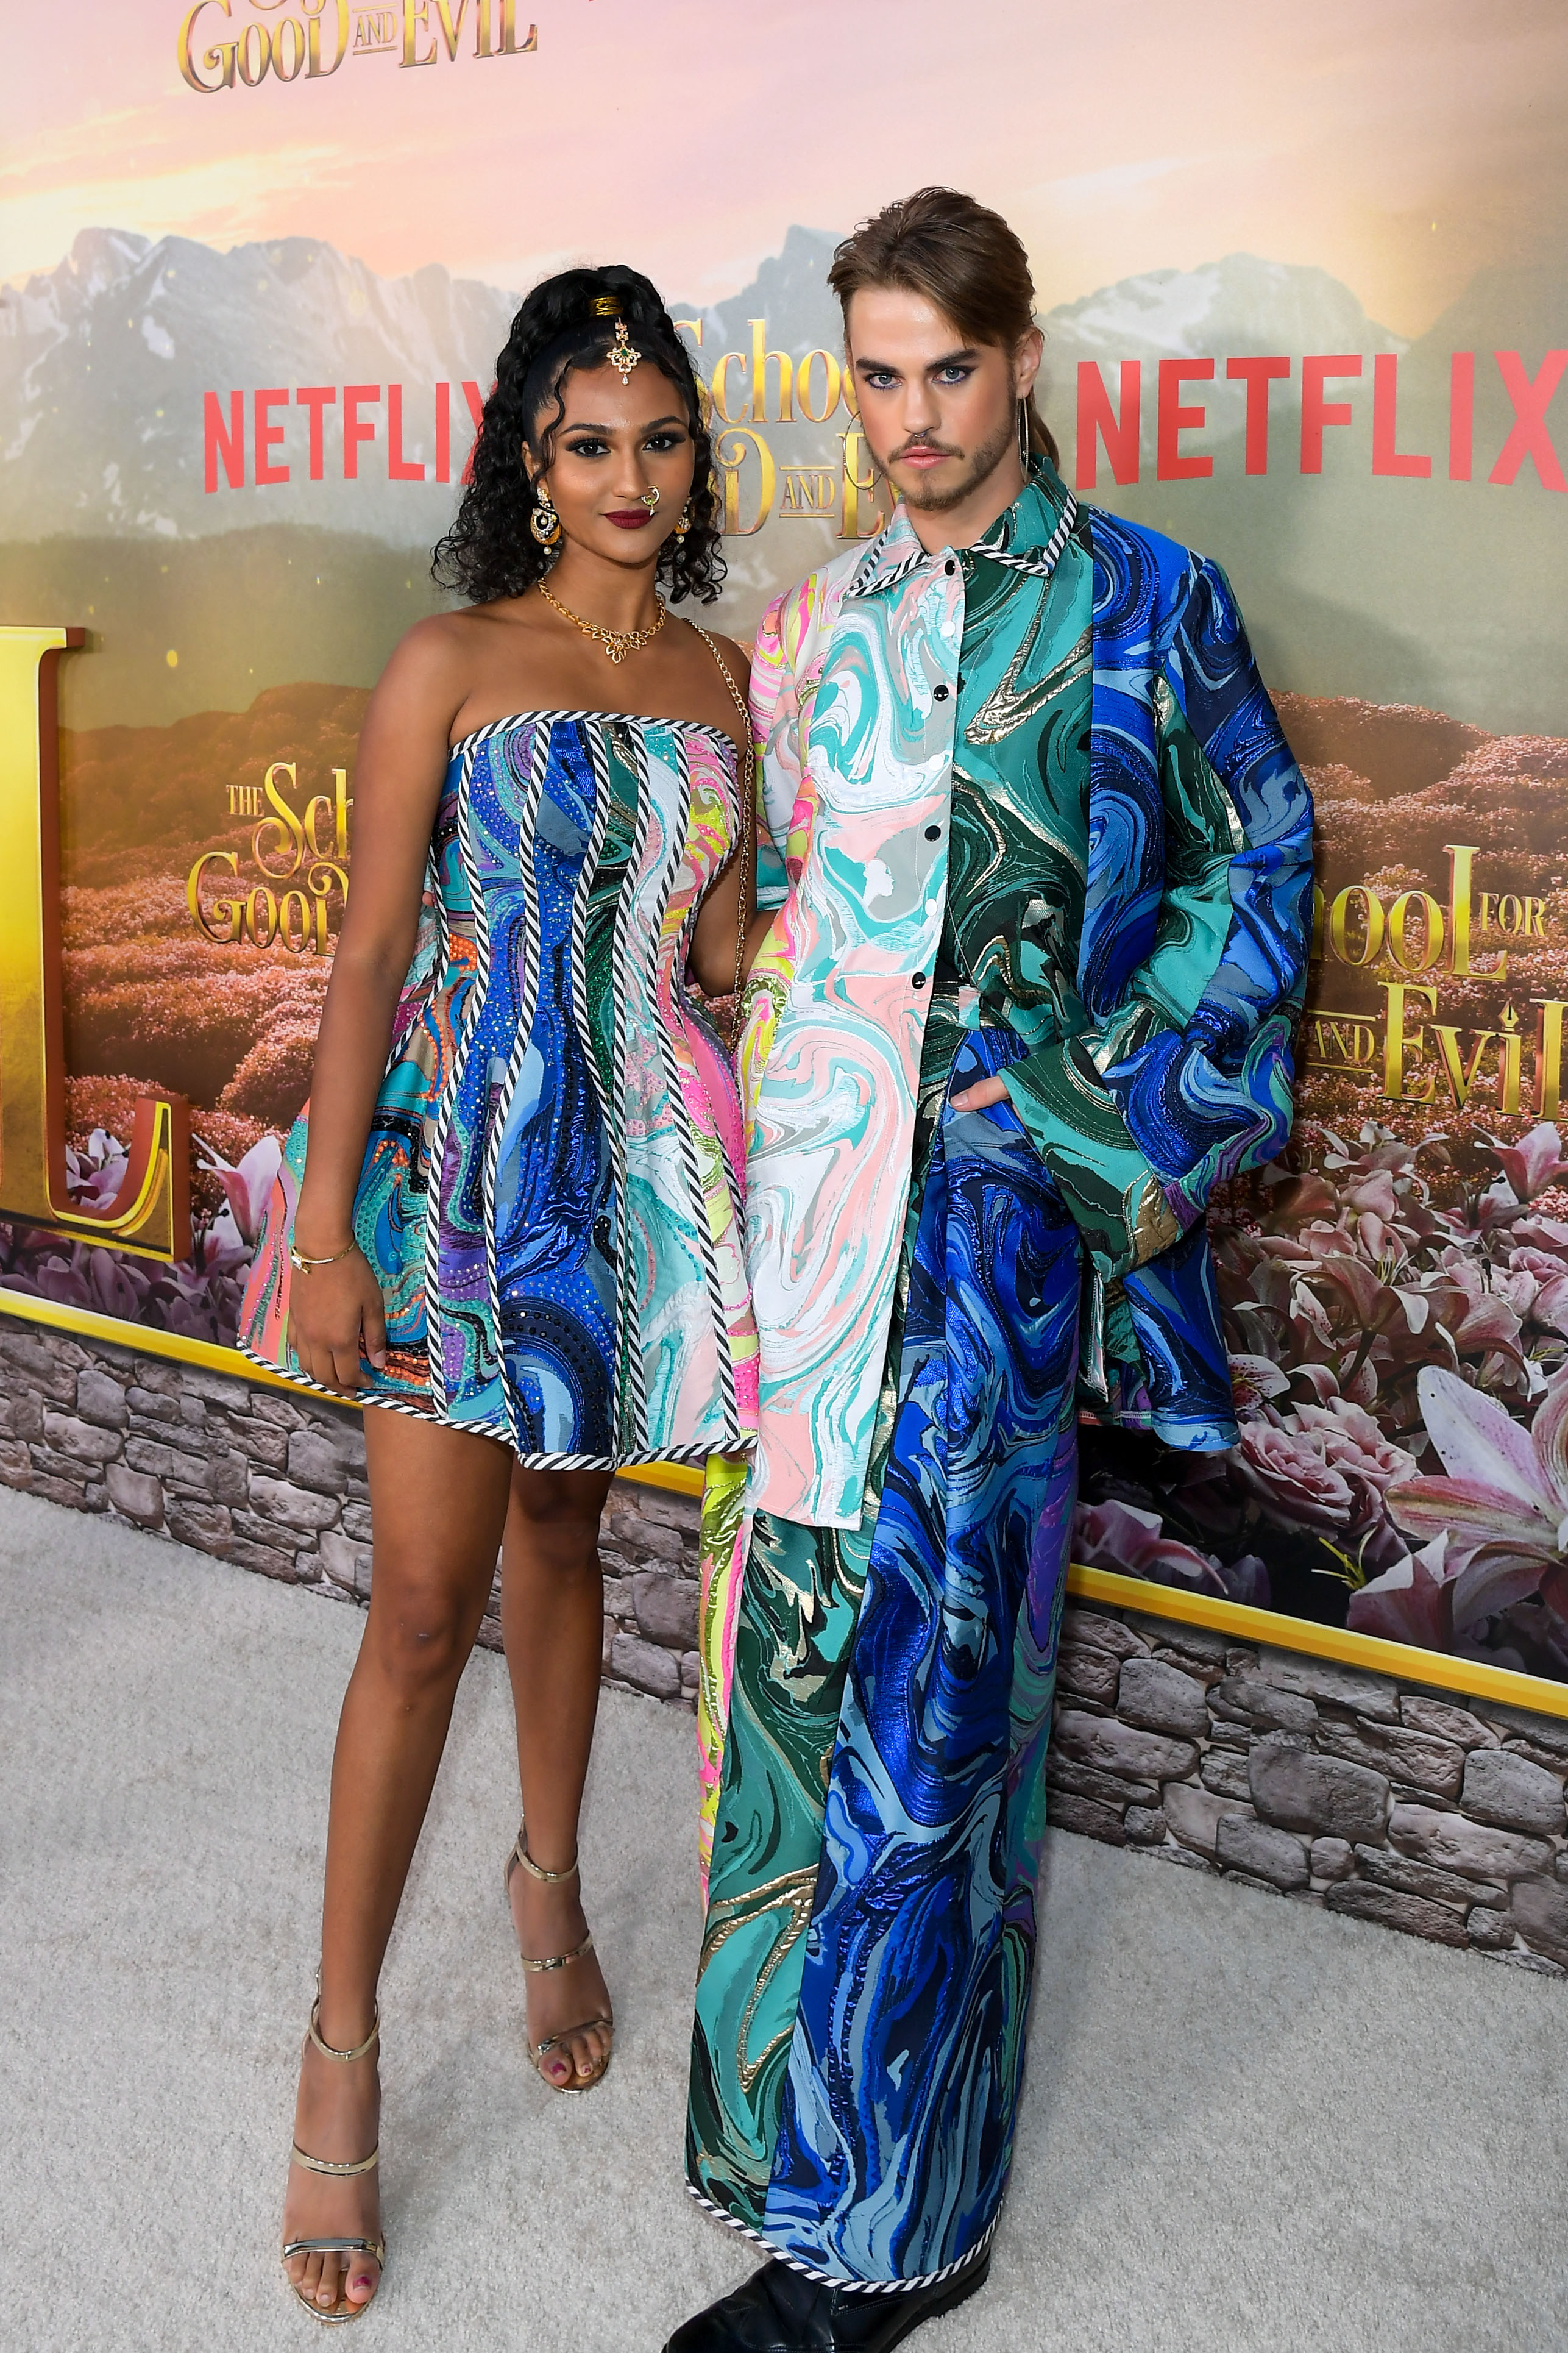 Ethan Martin on the red carpet with influencer Raasi Bommu of Netflix premiere of The School For Good and Evil